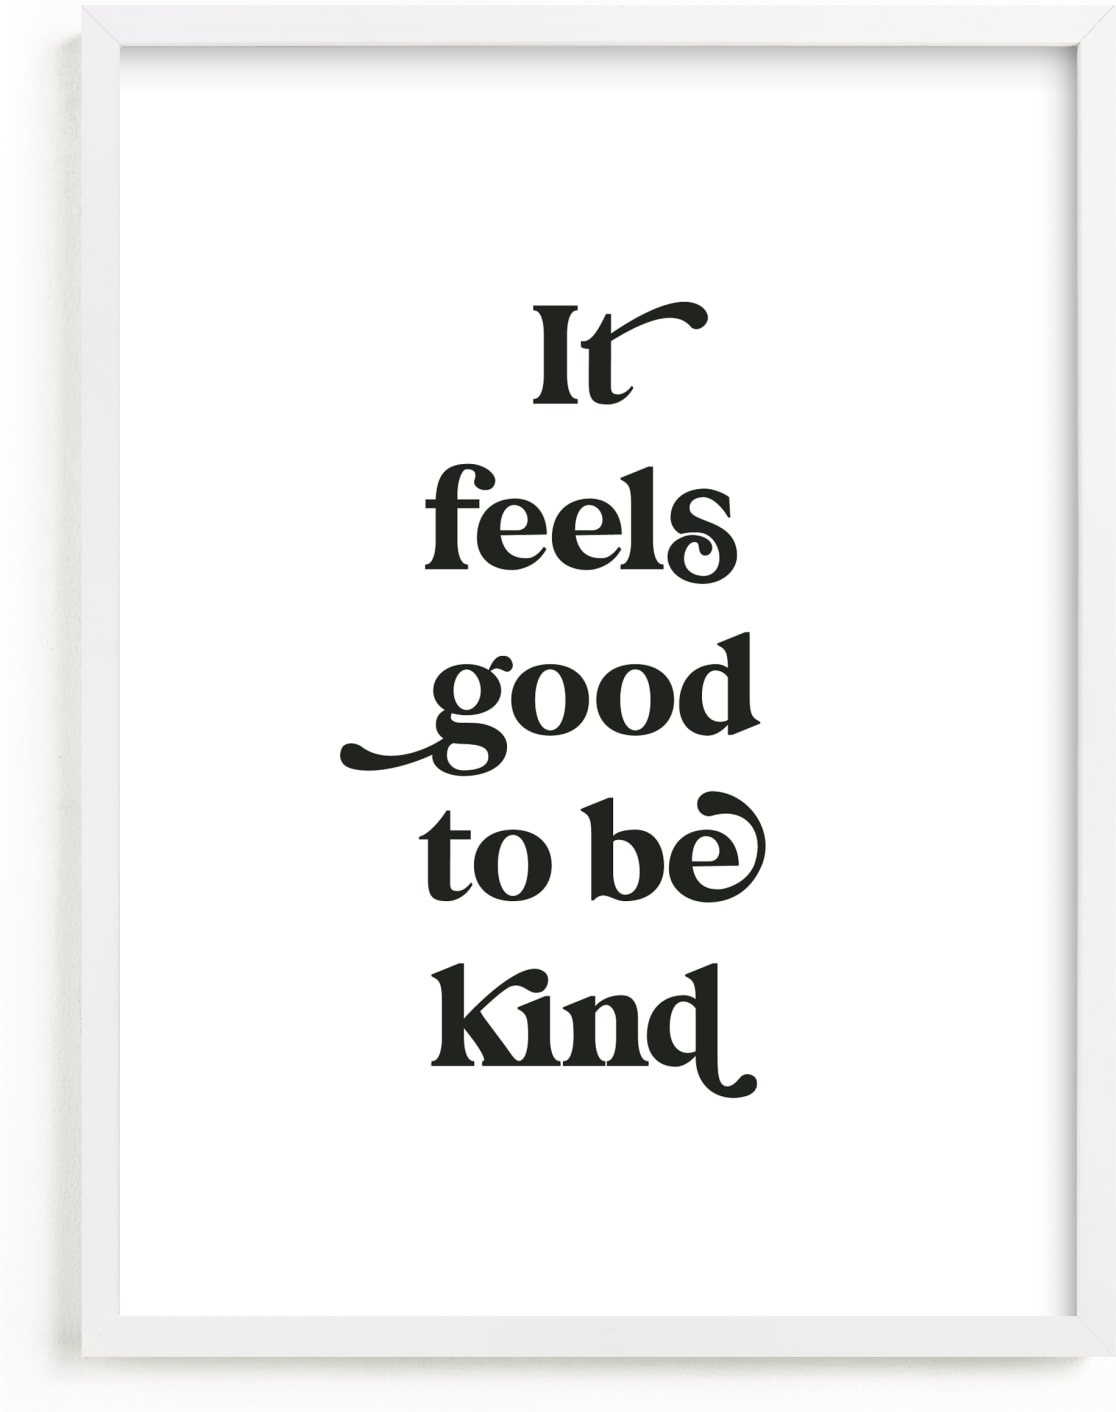 This is a black and white kids wall art by Leah Ragain called It feels good to be kind.